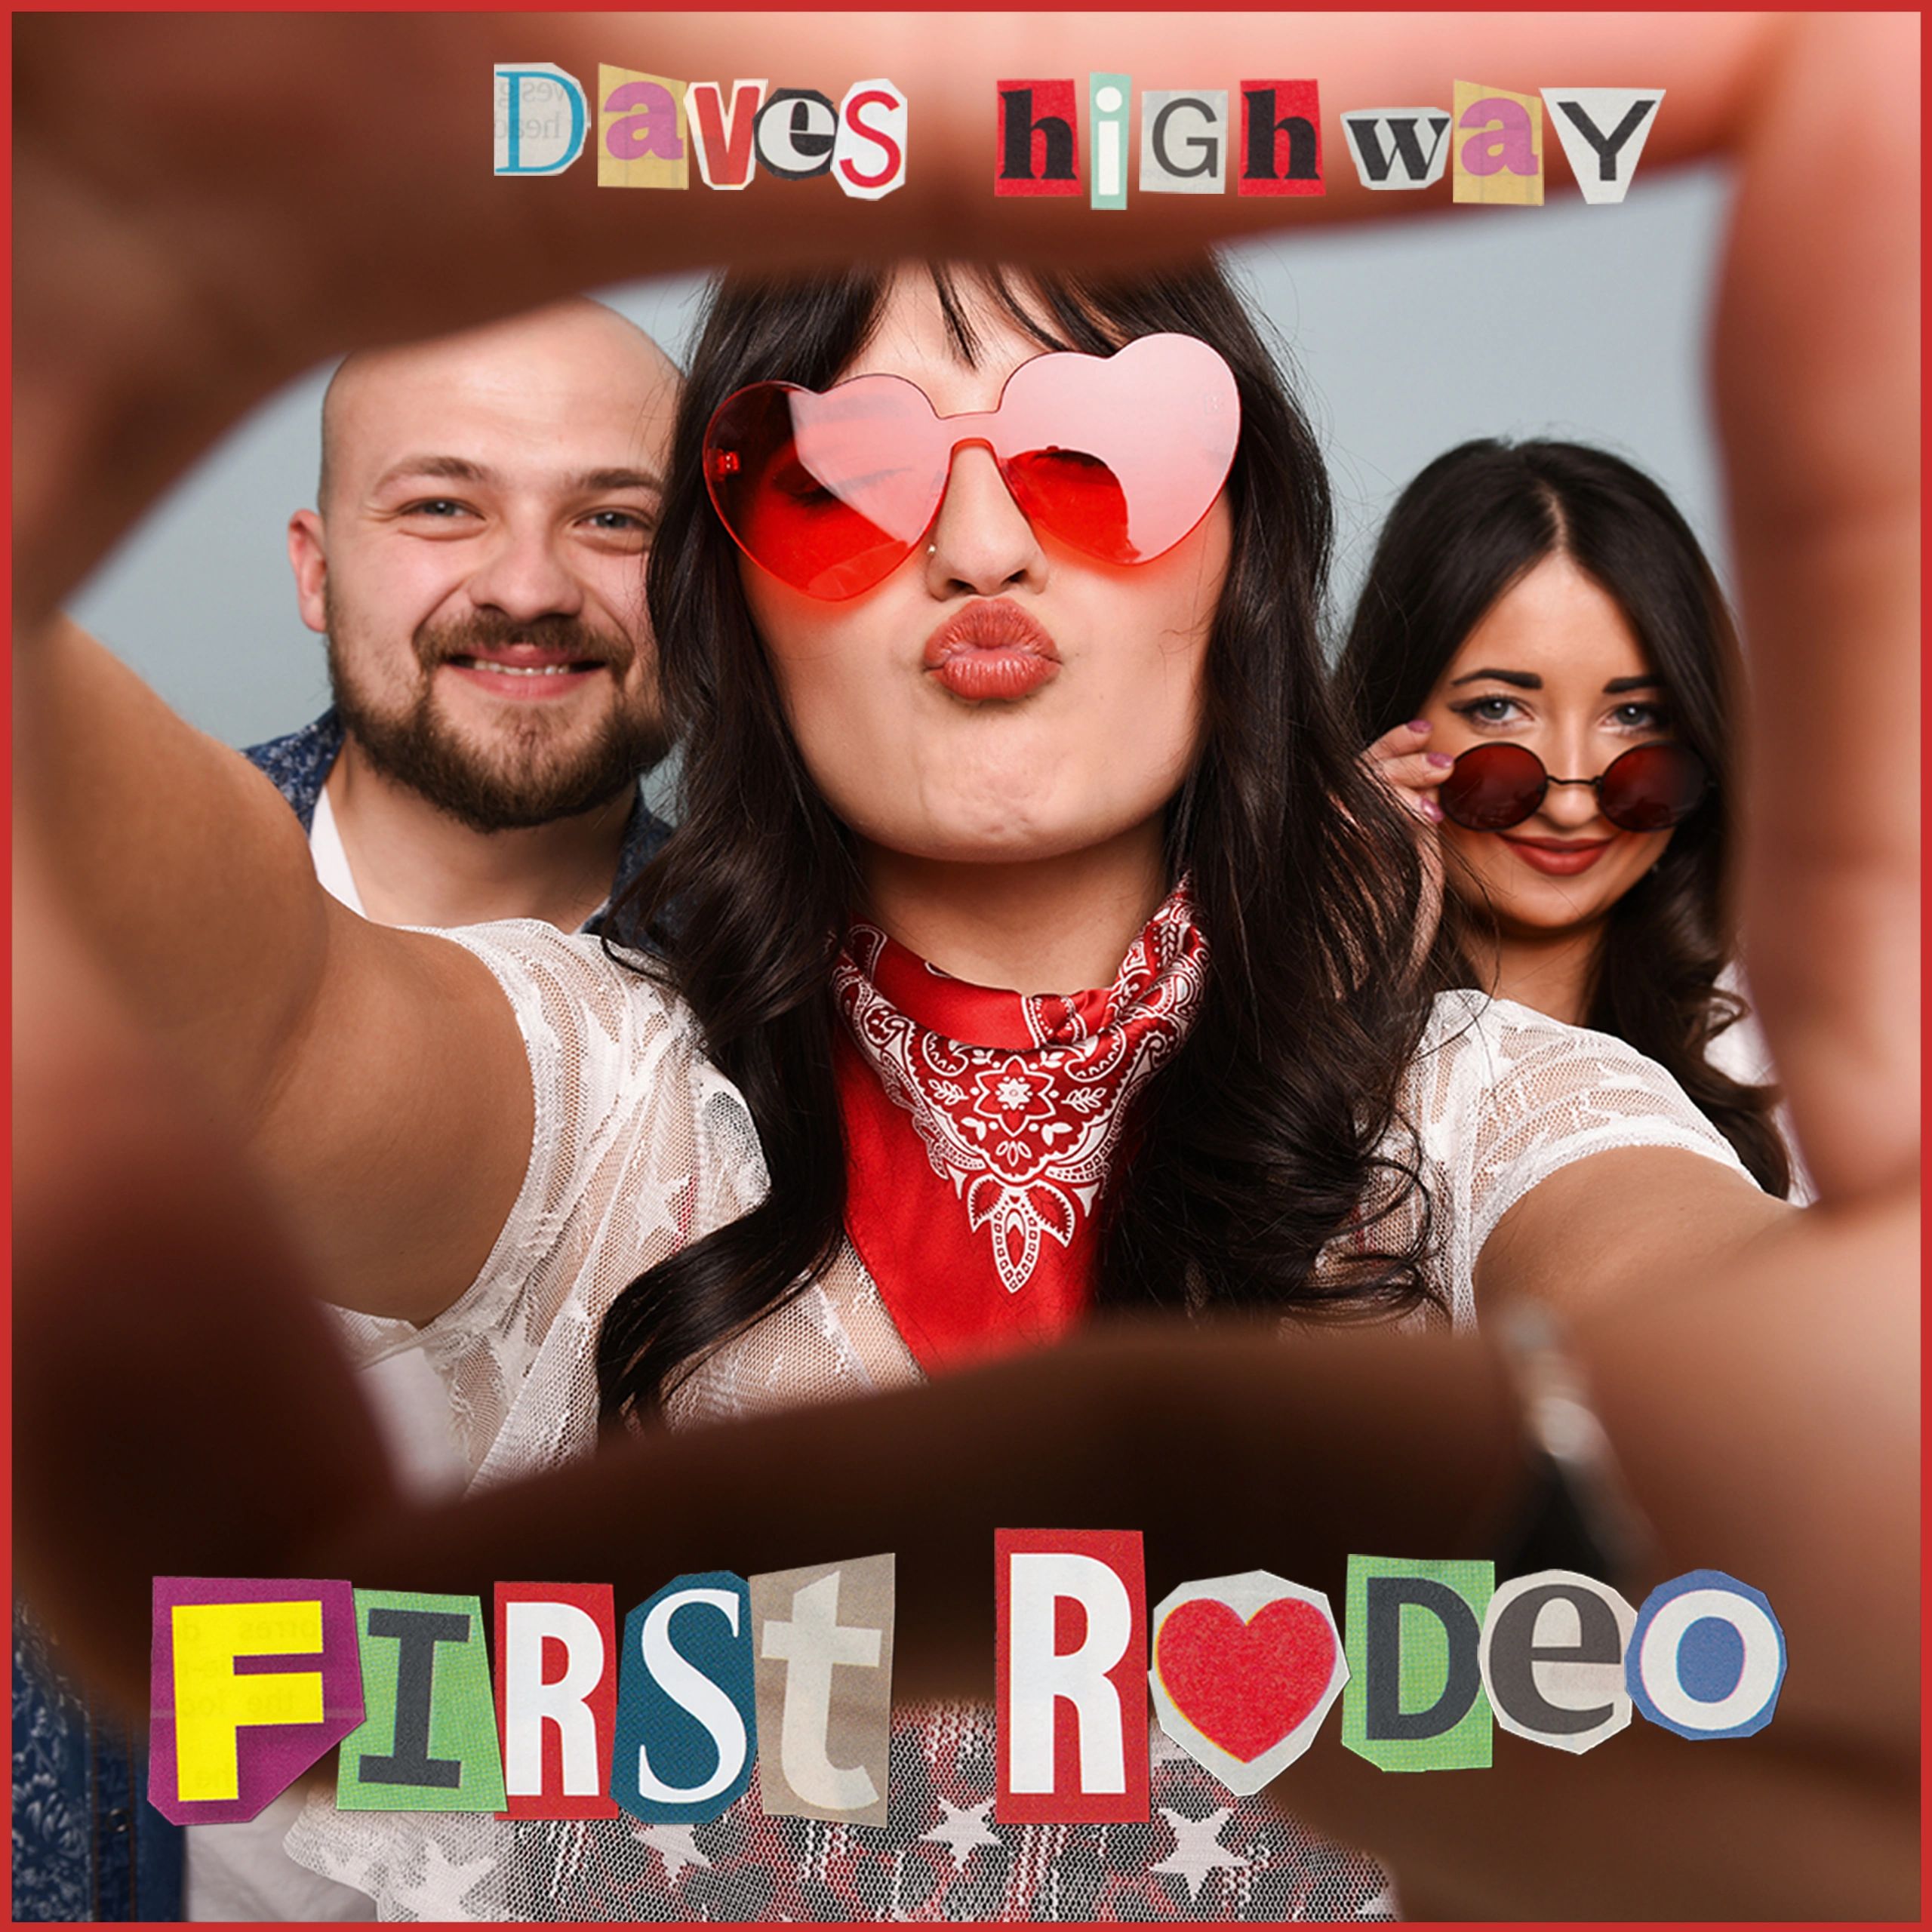 Daves Highway — First Rodeo cover artwork